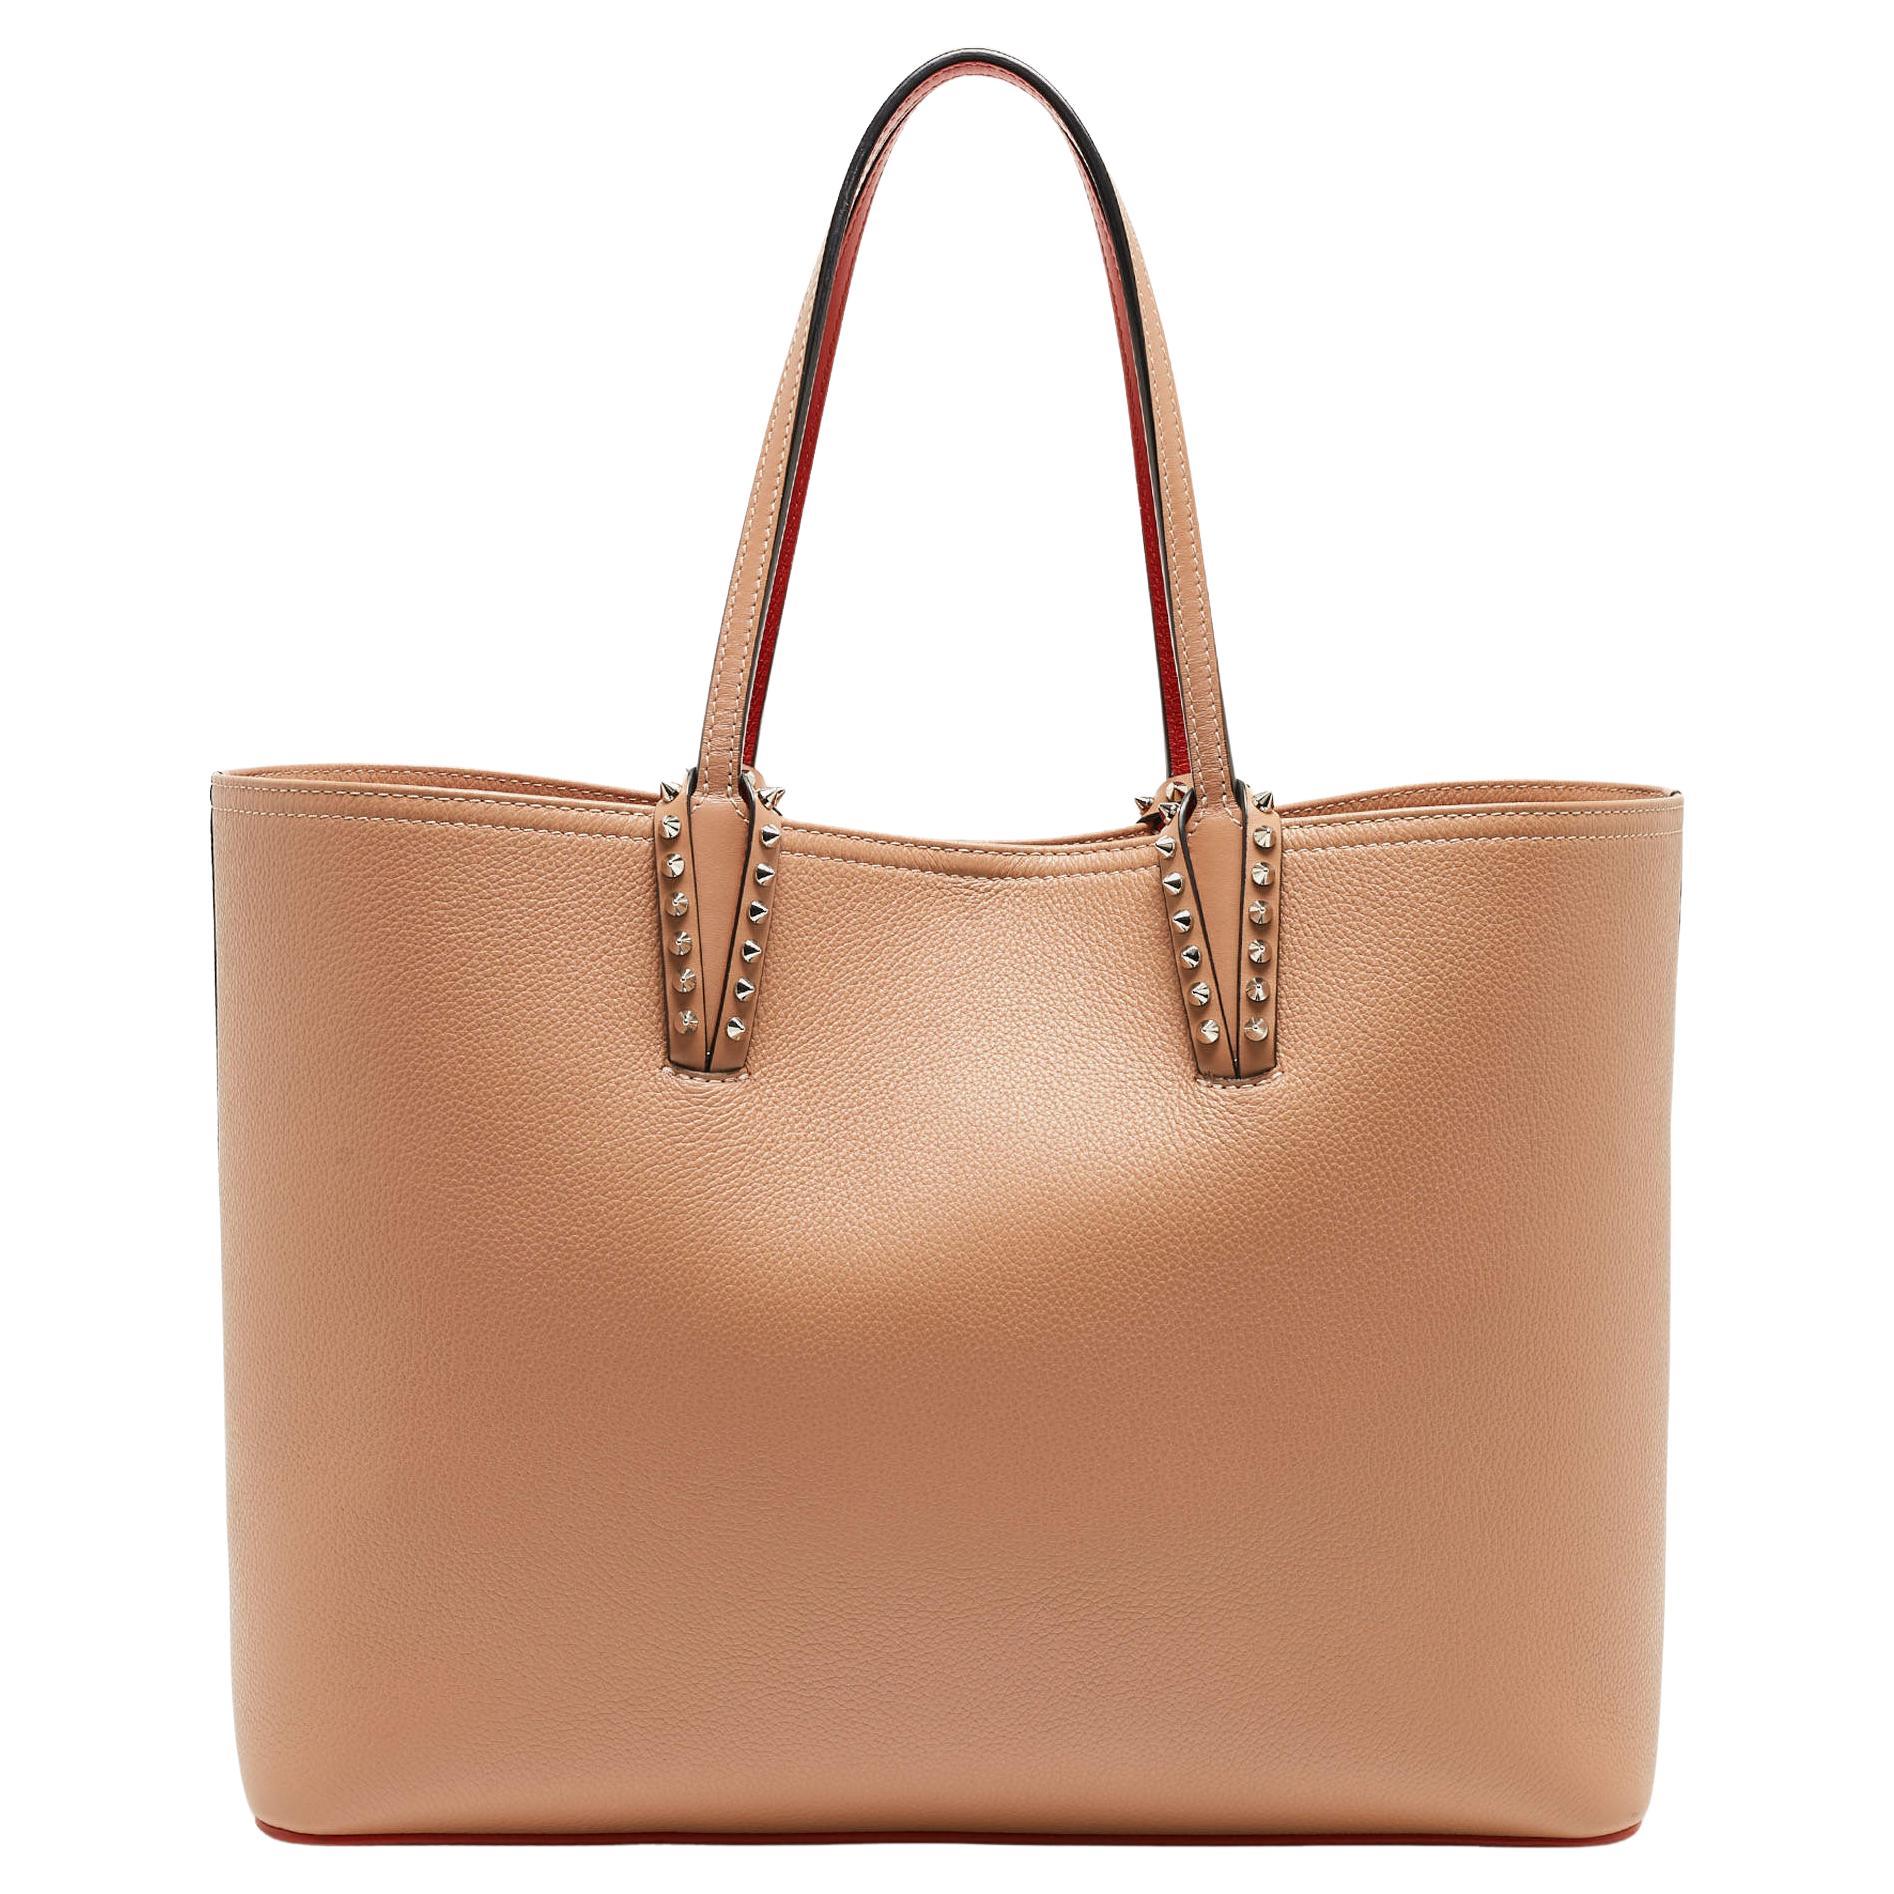 Christian Louboutin Beige/Red Leather and Rubber Cabata Tote